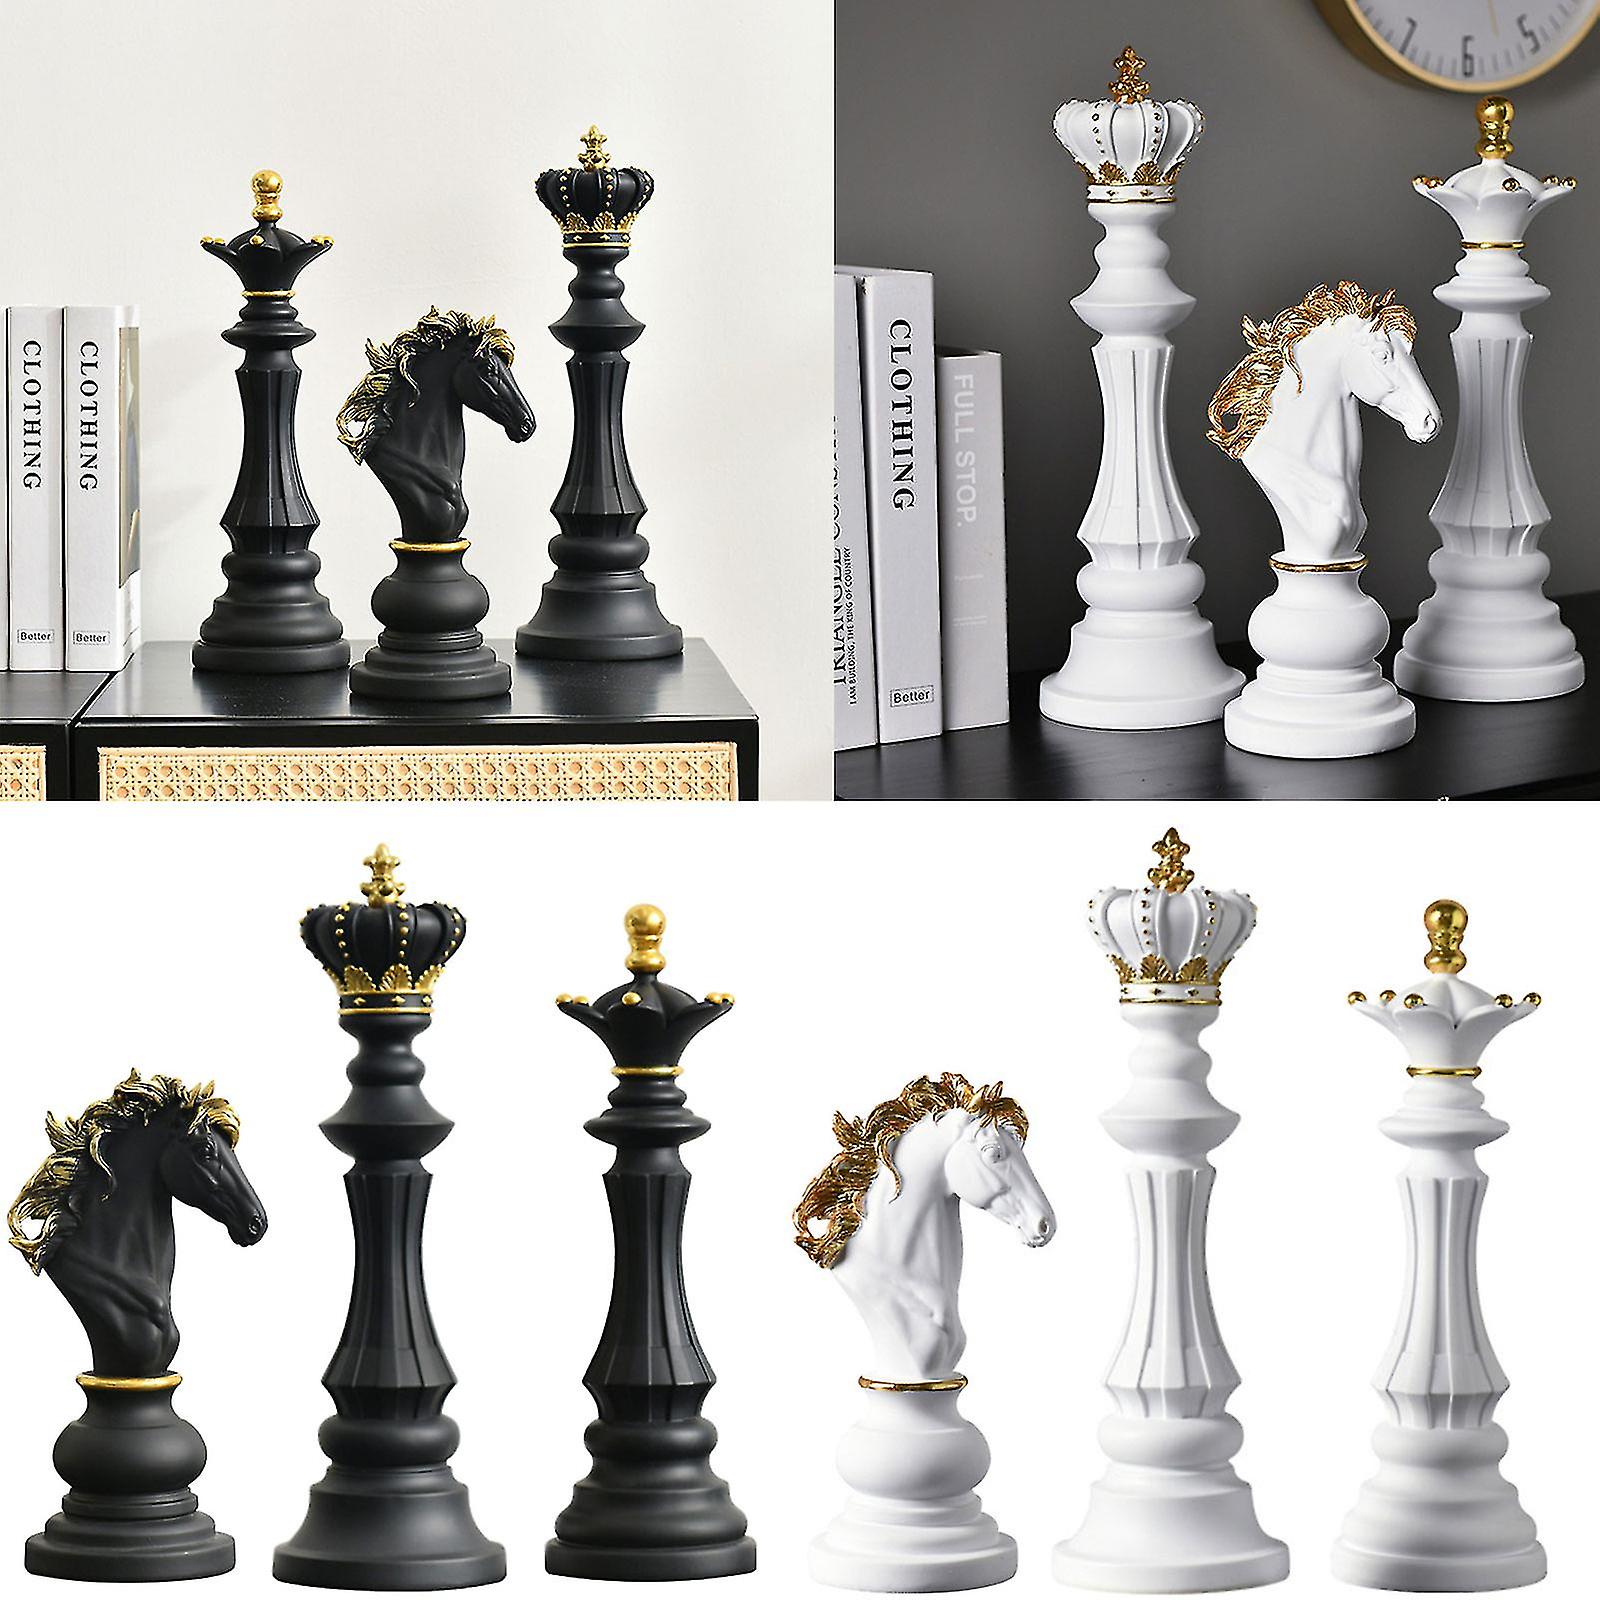 Resin Chess Pieces Board Games International Chess Figurines Retro Home Decor